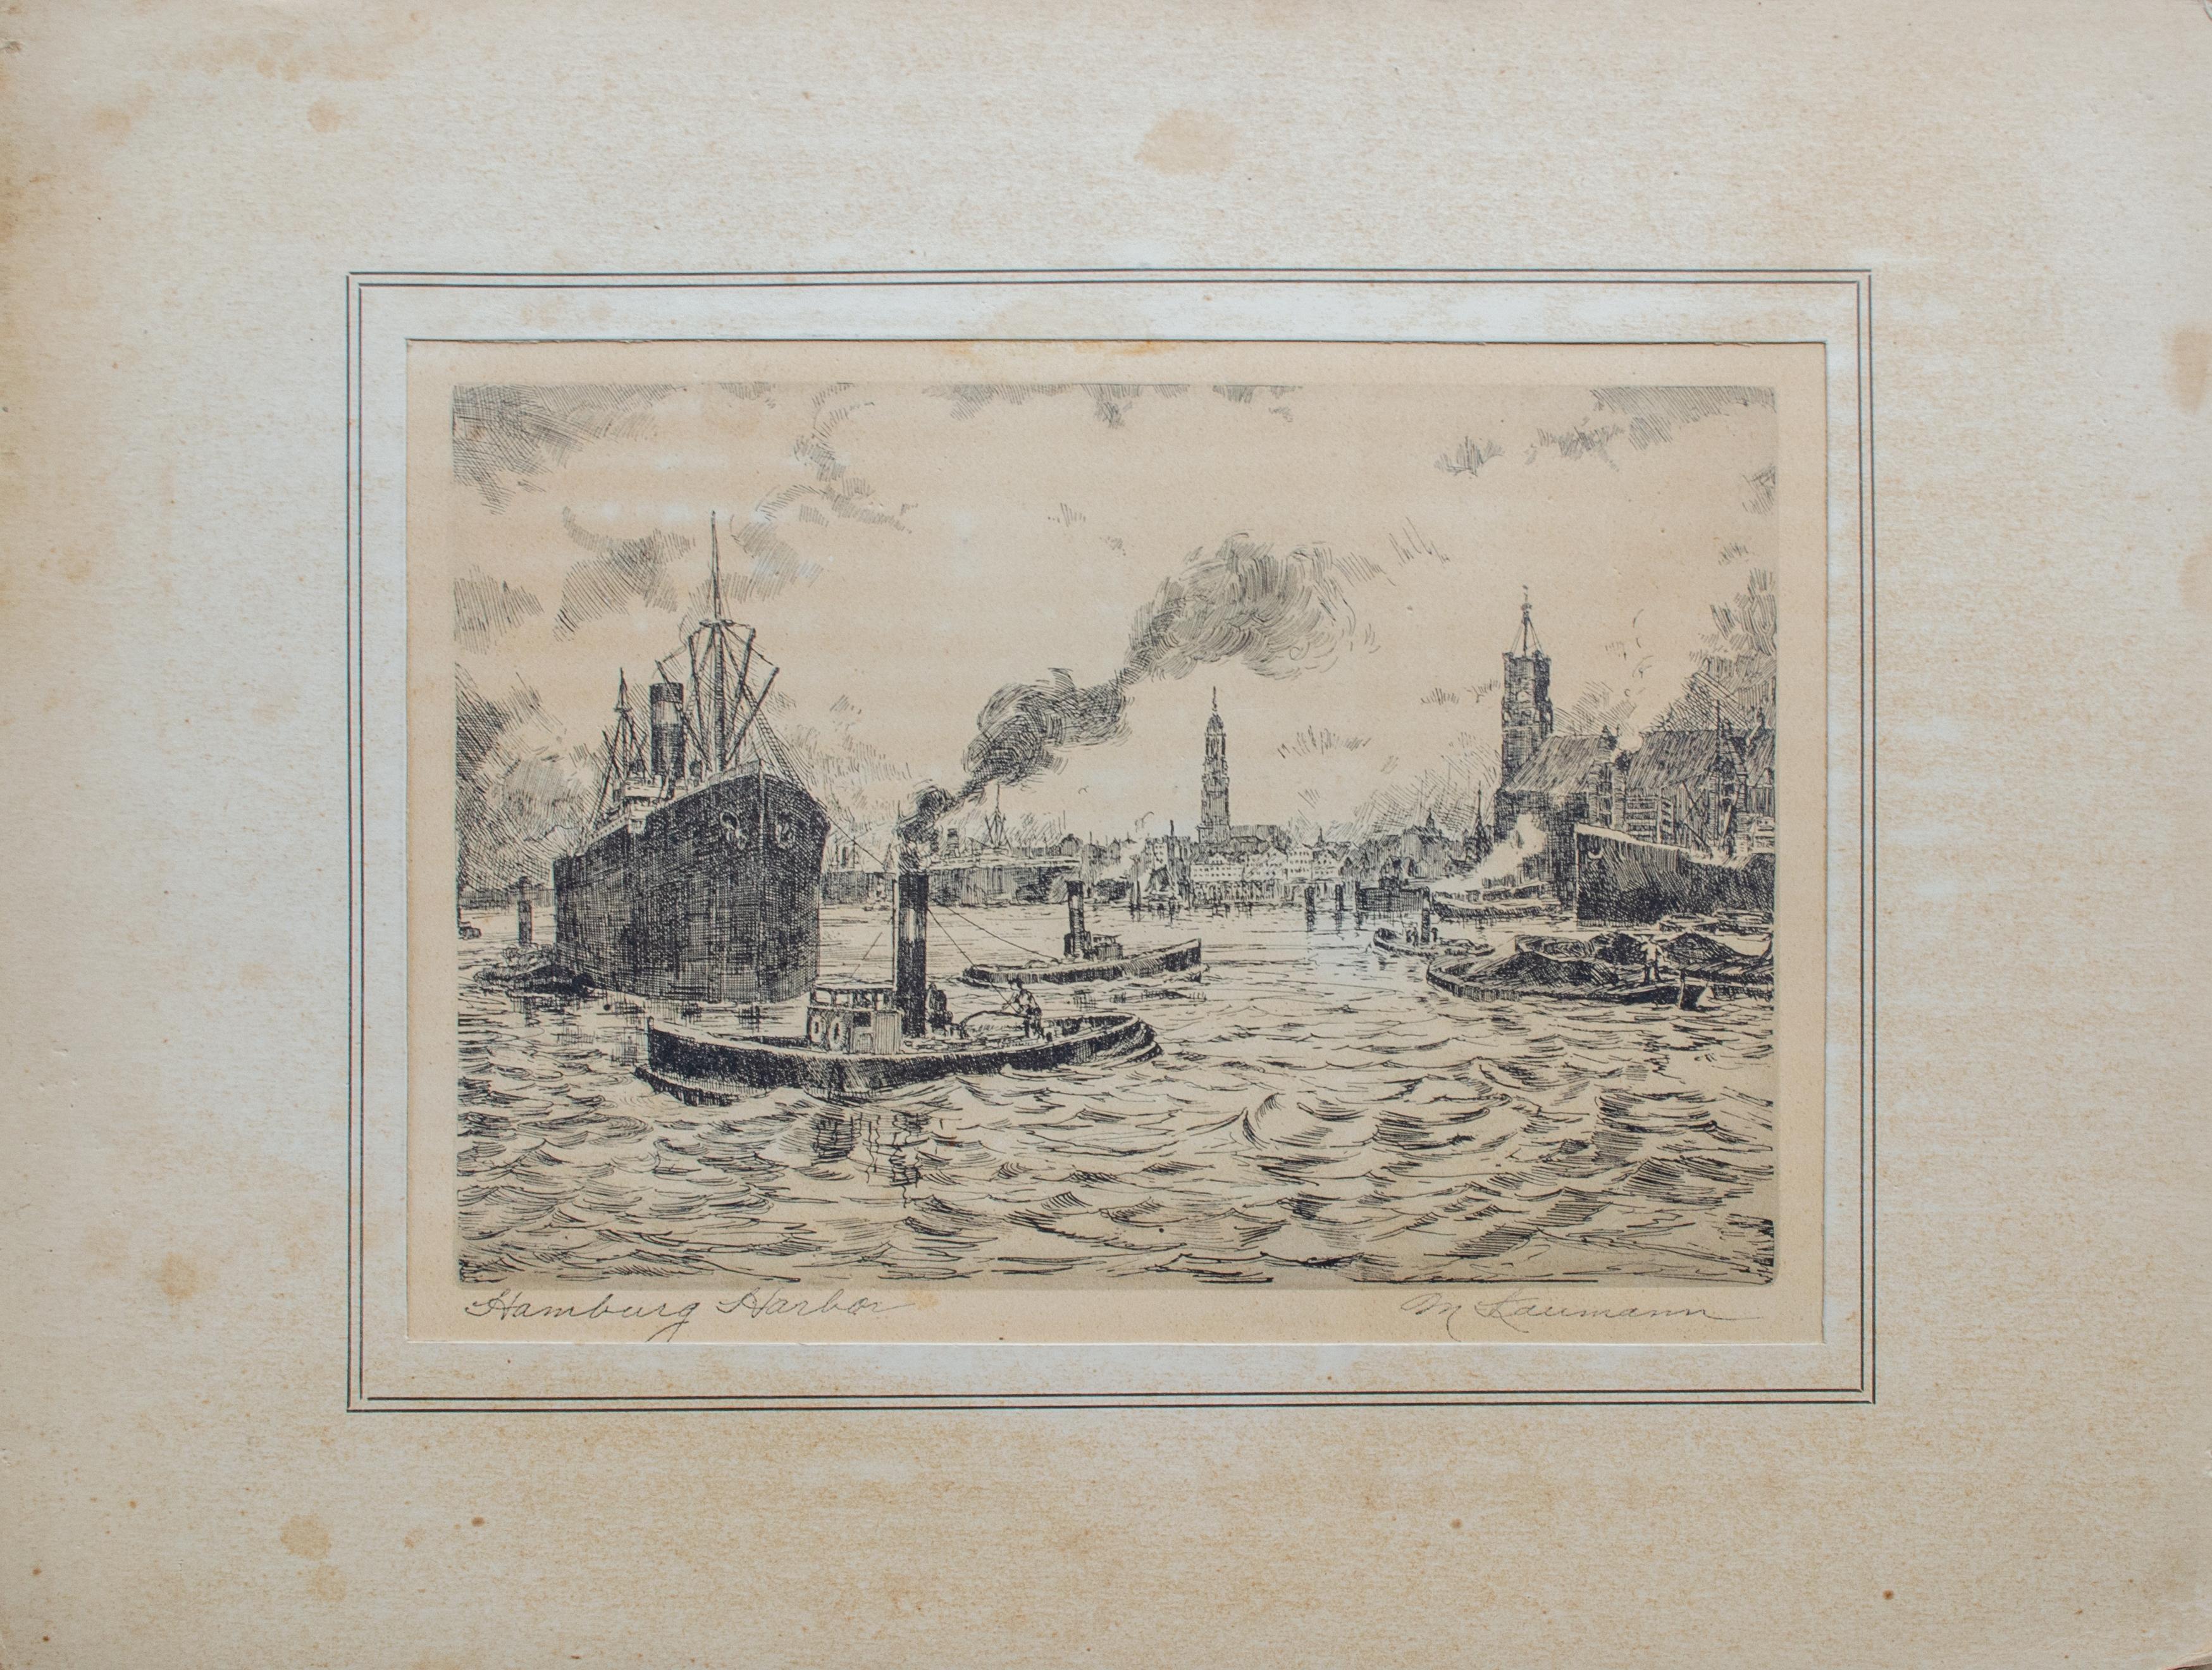 Hans Kaumann (German, 20th Century)
Hamburg Harbor, c. 1920
Etching
12 x 16 in.

This historic print depicting Hamburg Harbor offers a look into the past, presenting a c. 1920s view of the iconic shipping center.